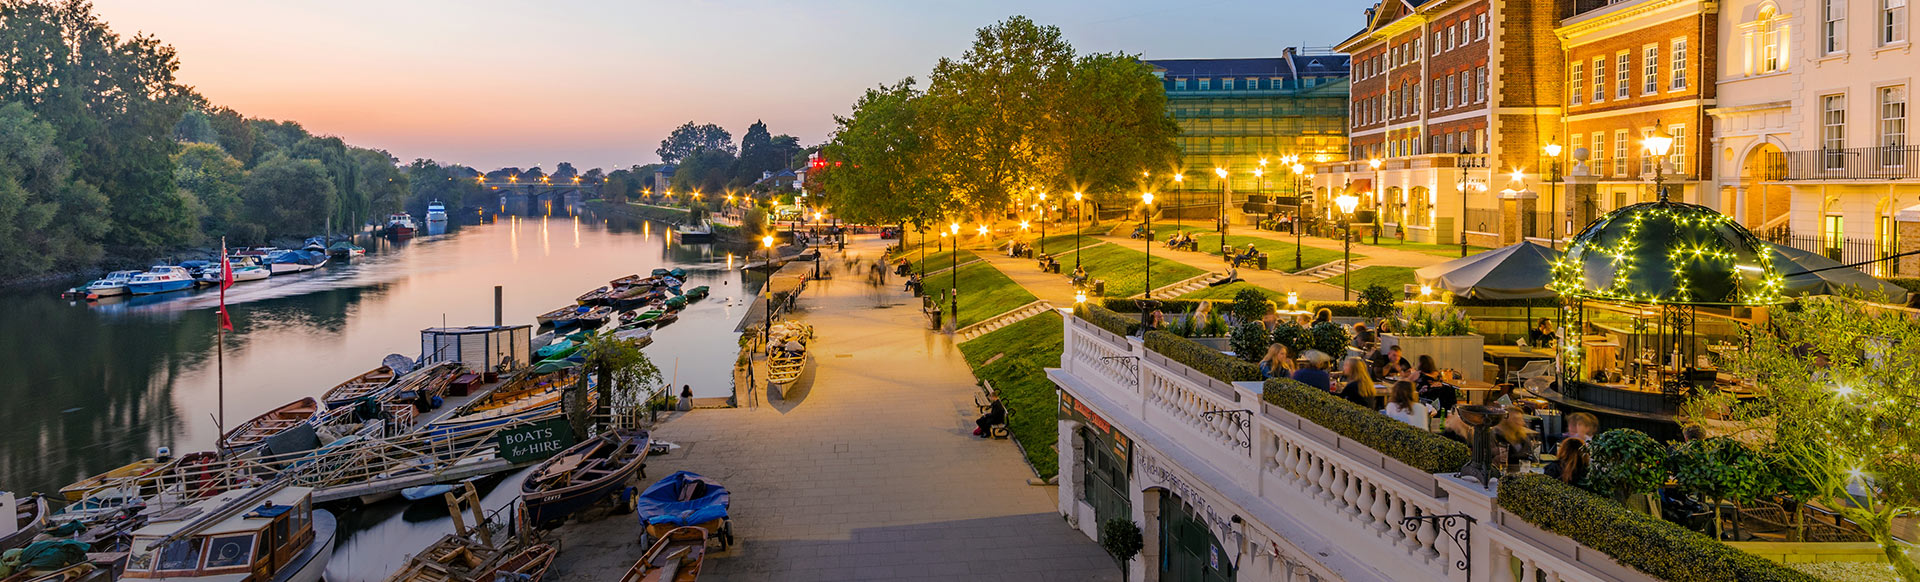 Evening view of Richmond's riverfront area. Image courtesy of Shuterstock